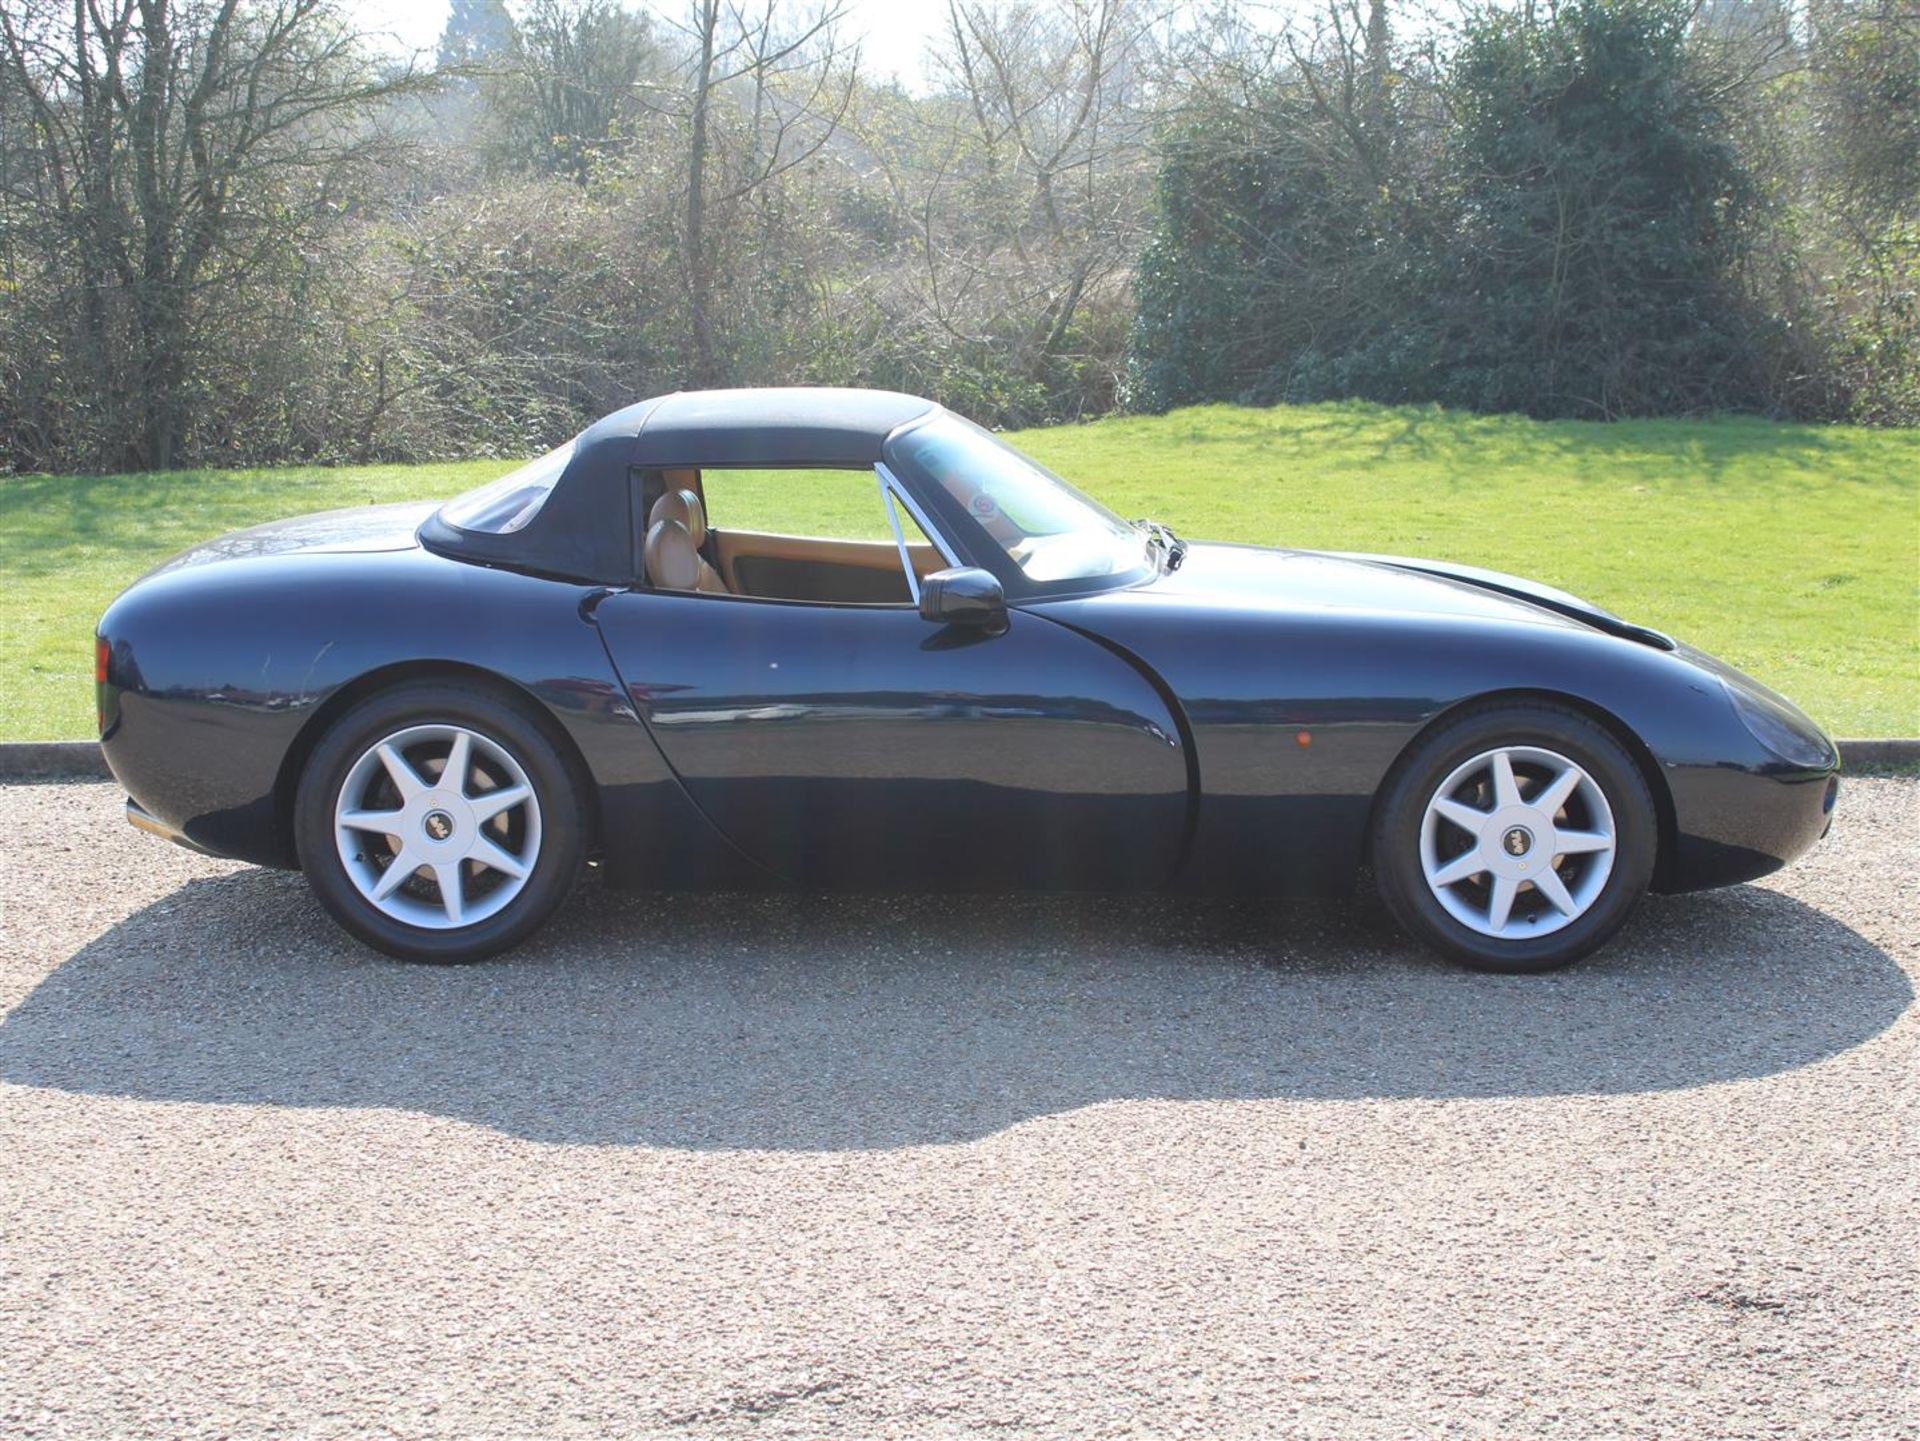 1993 TVR Griffith 500 - Image 7 of 19